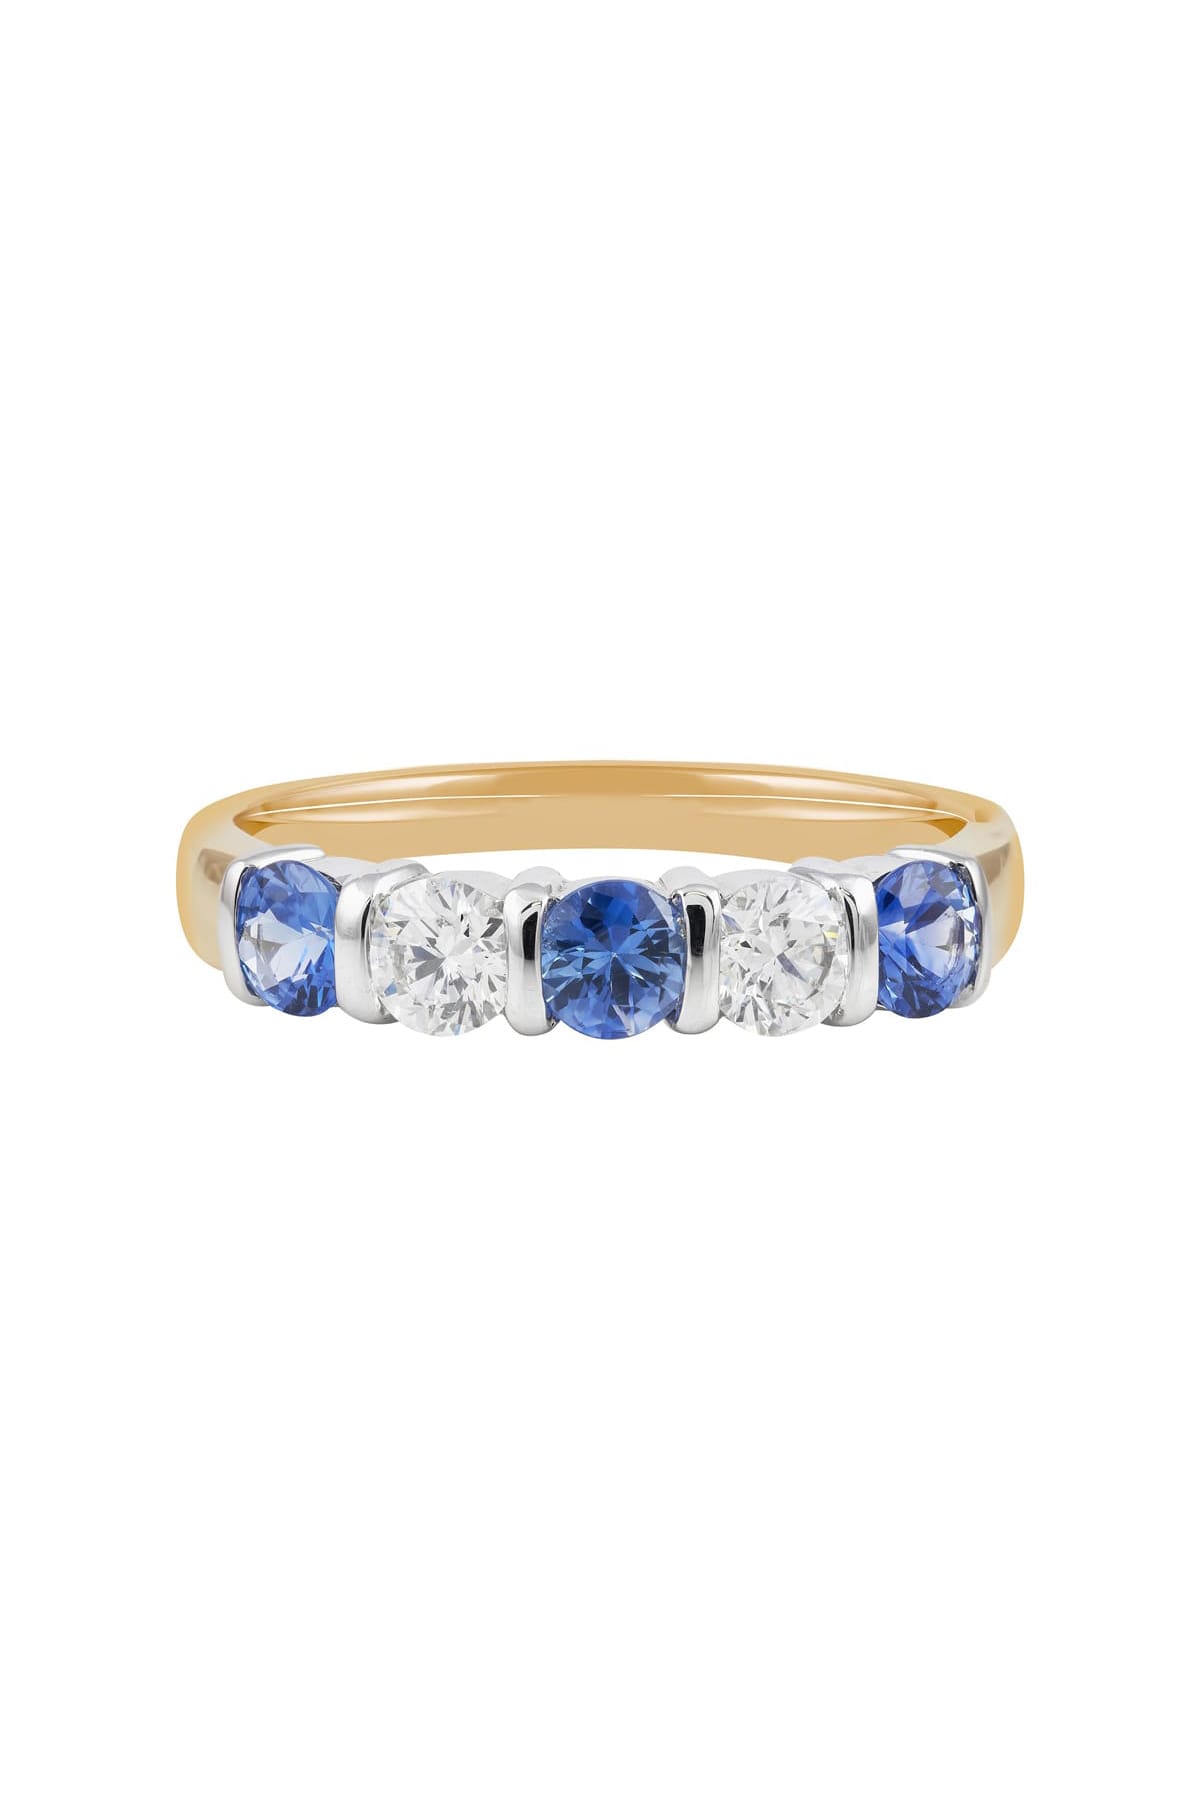 Ceylon Sapphire and Diamond Dress Ring set in 18ct Yellow and White gold available at LeGassick Diamonds and Jewellery Gold Coast, Australia.